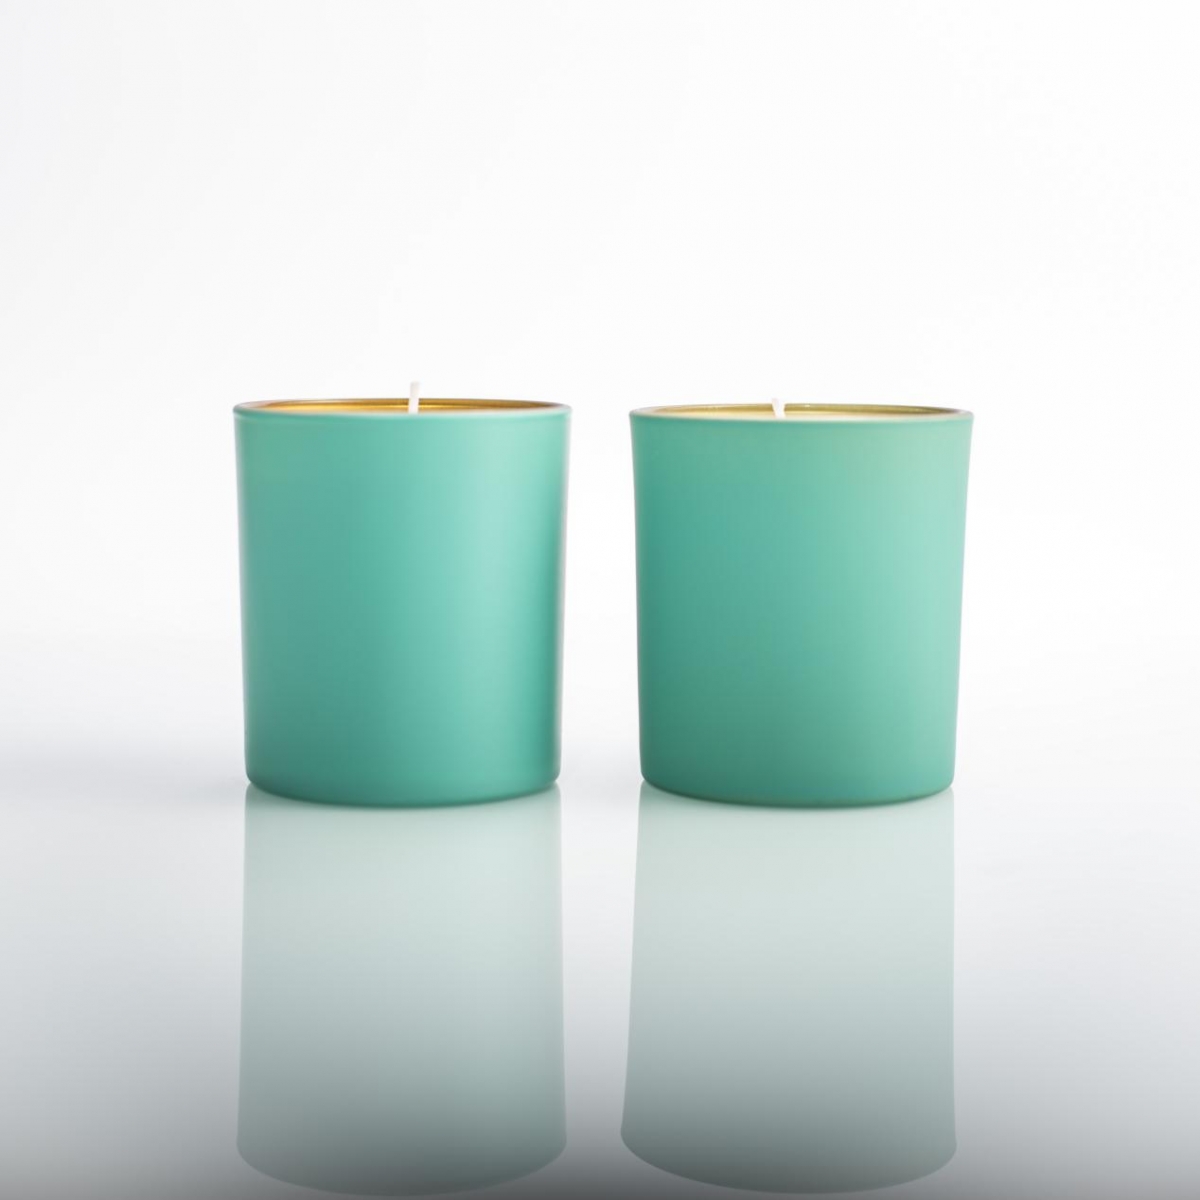 Green Glass Jar Candles – Best Soy Wax ,Lemon Basil & Mandarin ,Private Label ,China Factory Price-HOWCANDLE-Candles,Scented Candles,Aromatherapy Candles,Soy Candles,Vegan Candles,Jar Candles,Pillar Candles,Candle Gift Sets,Essential Oils,Reed Diffuser,Candle Holder,